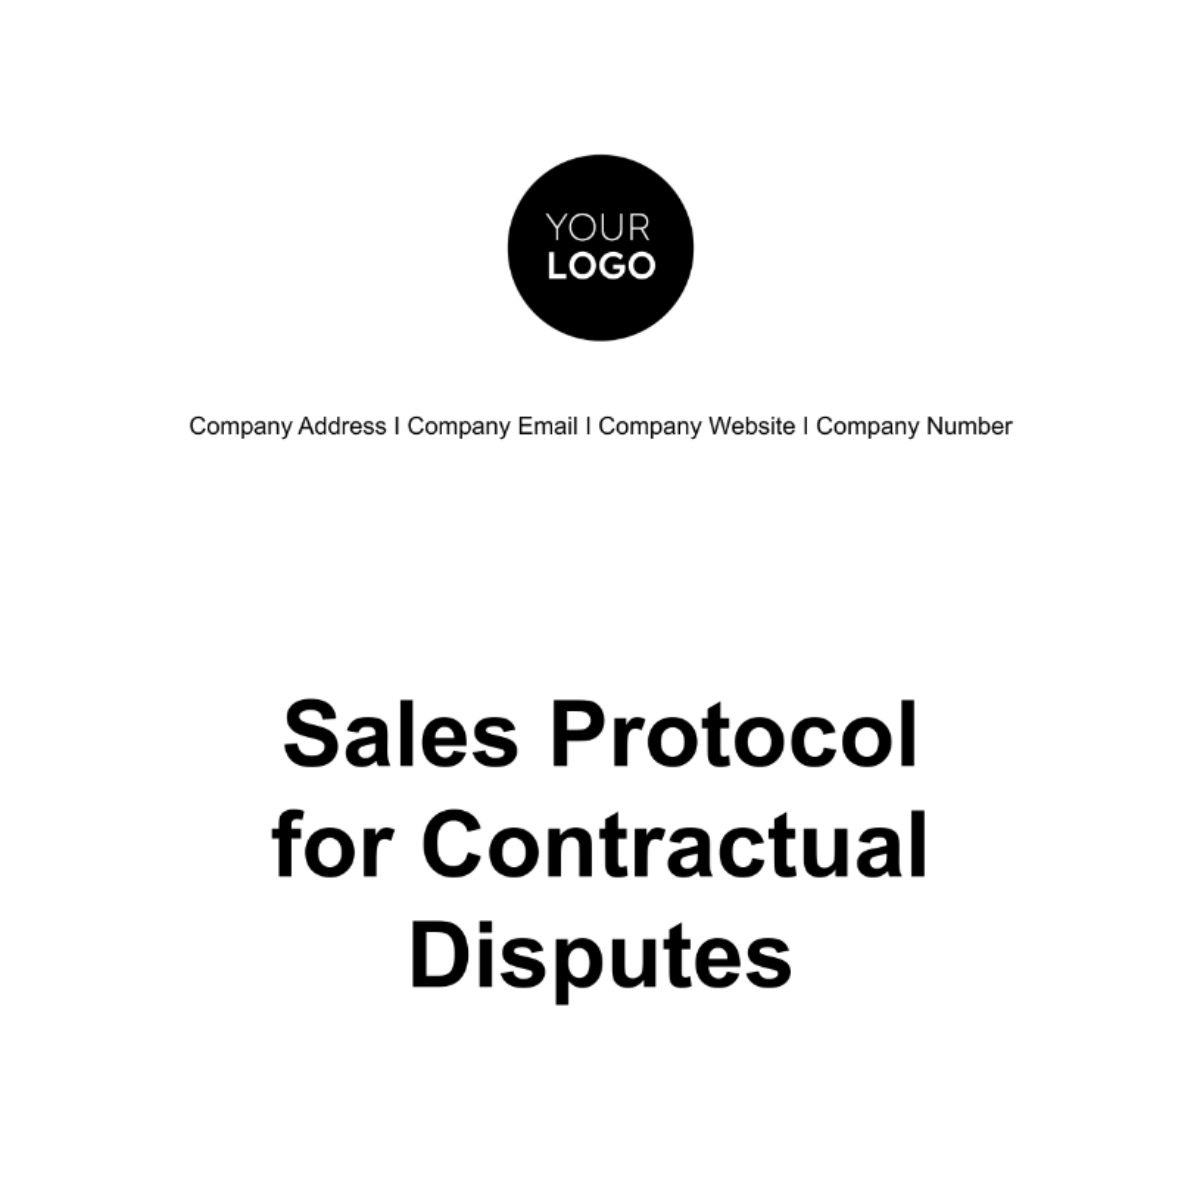 Free Sales Protocol for Contractual Disputes Template